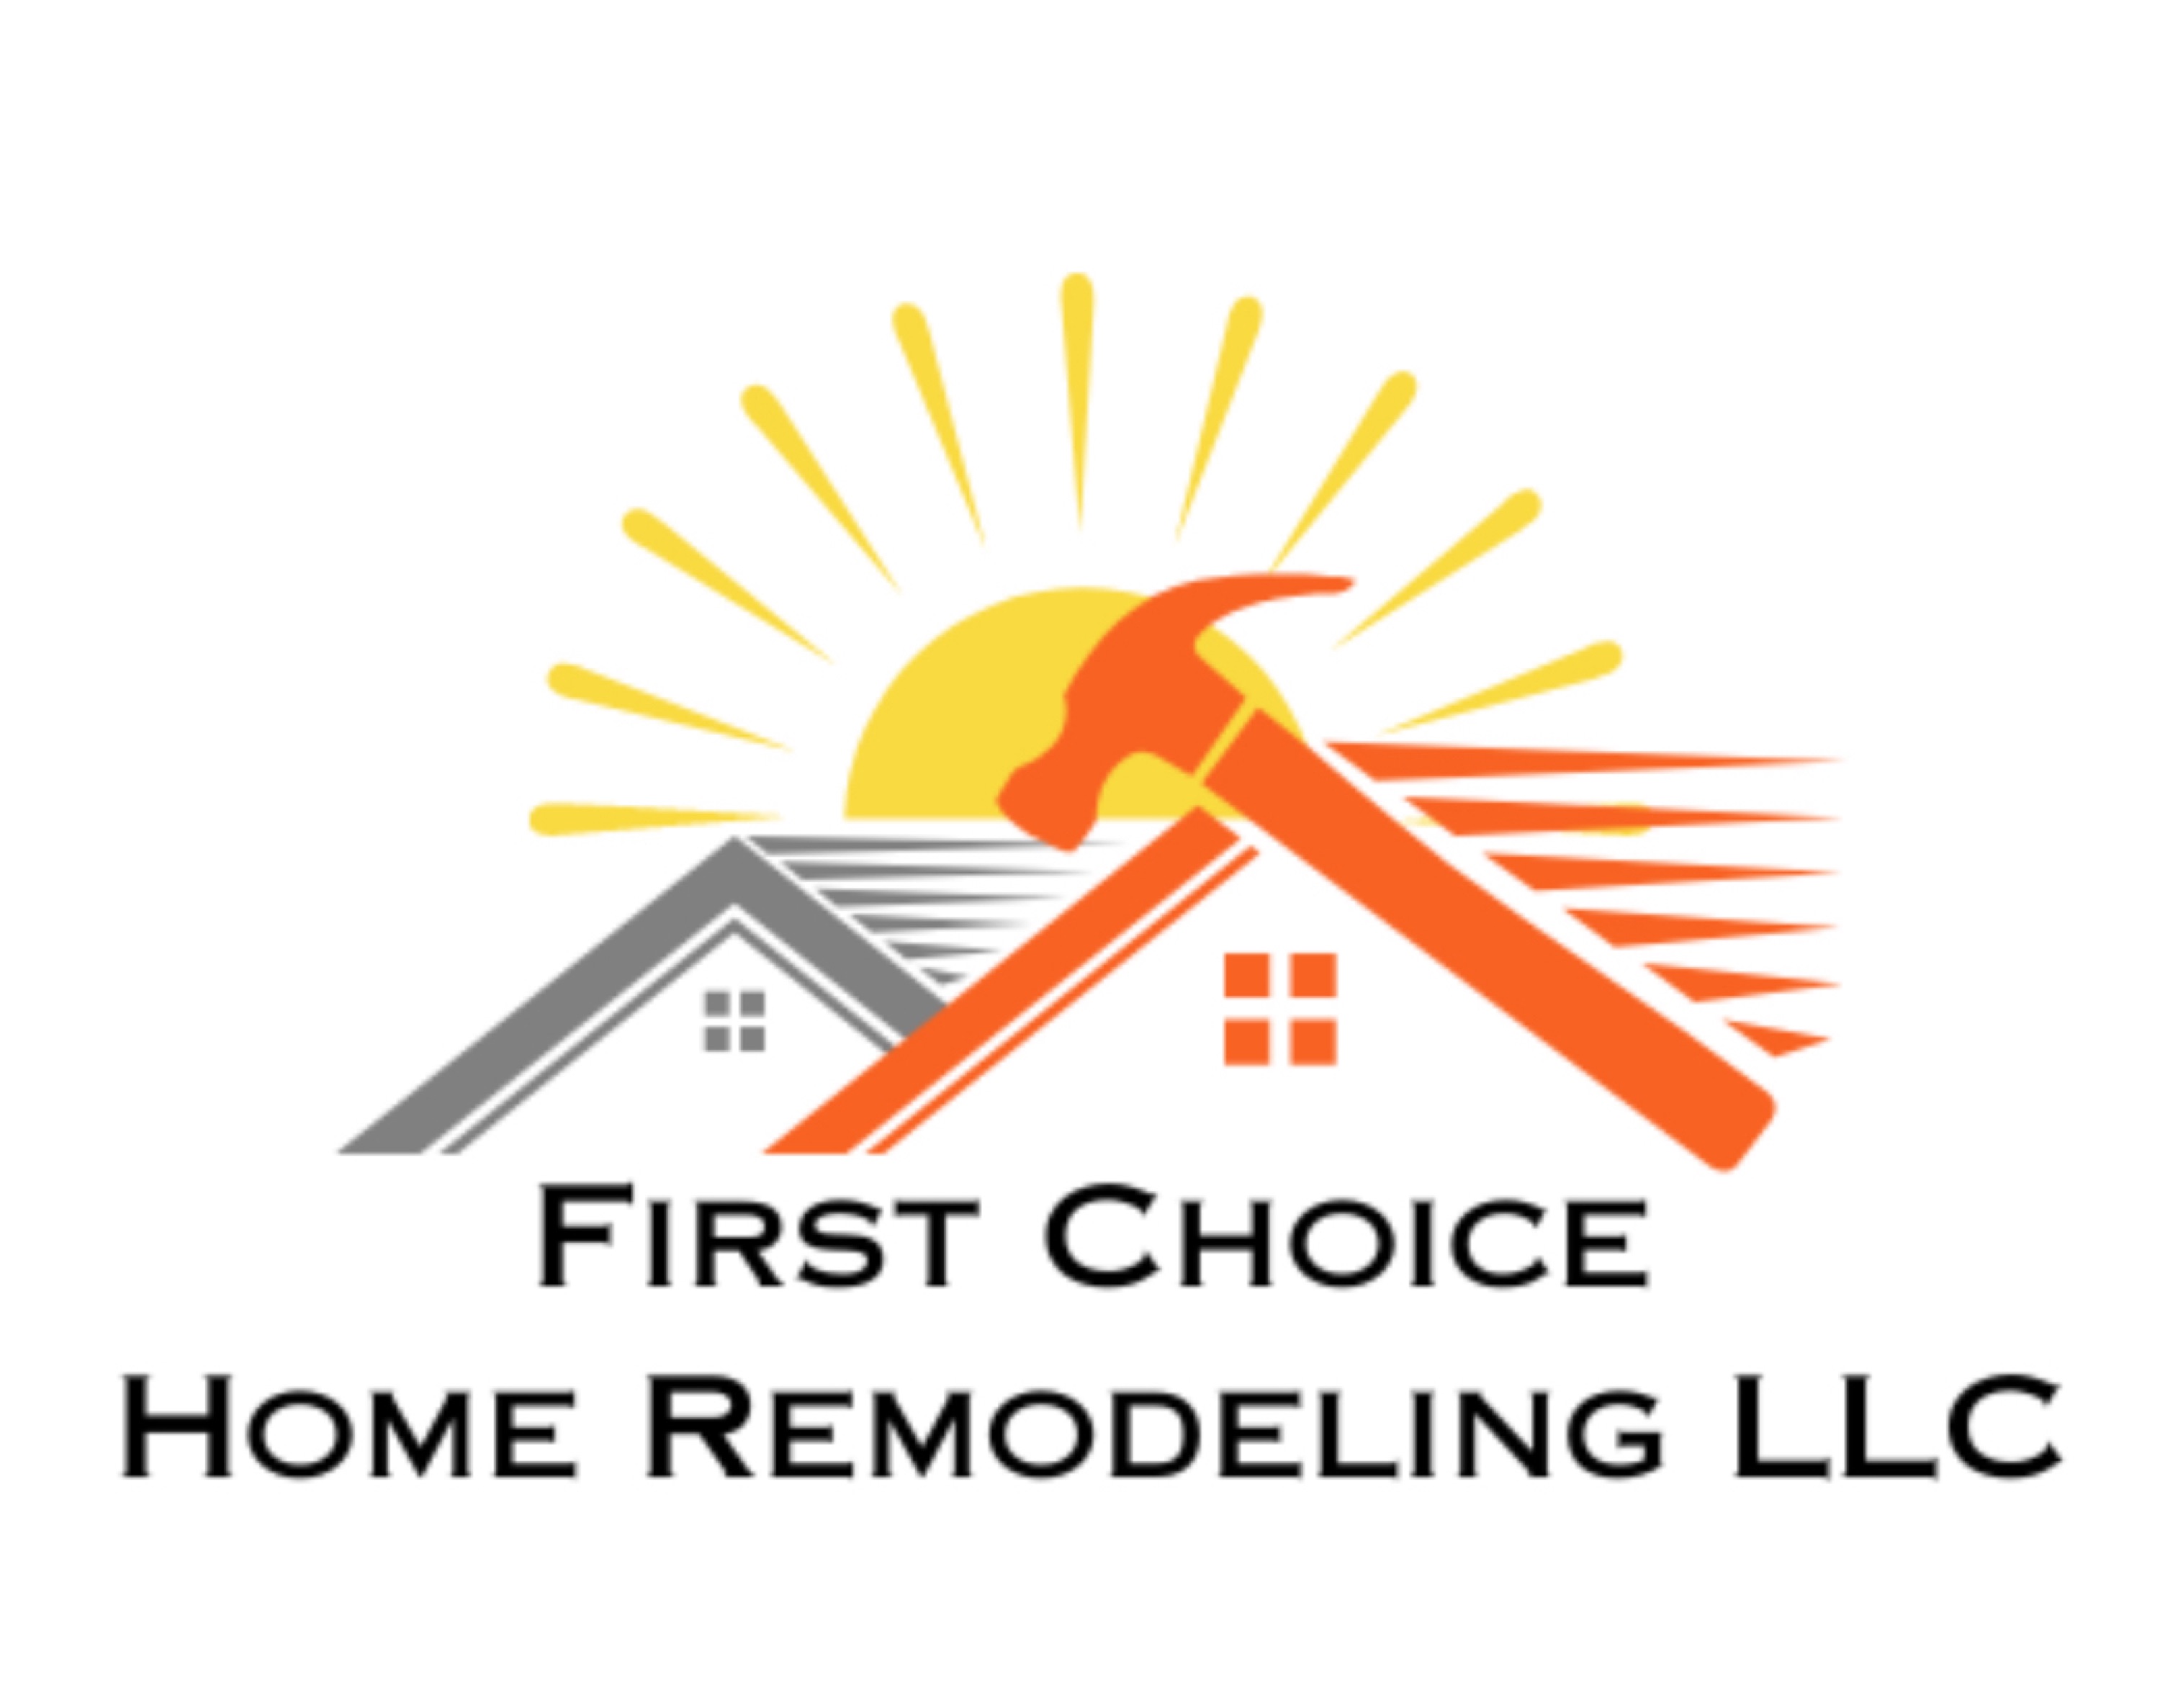 FIRST CHOICE HOME REMODELING LLC Logo